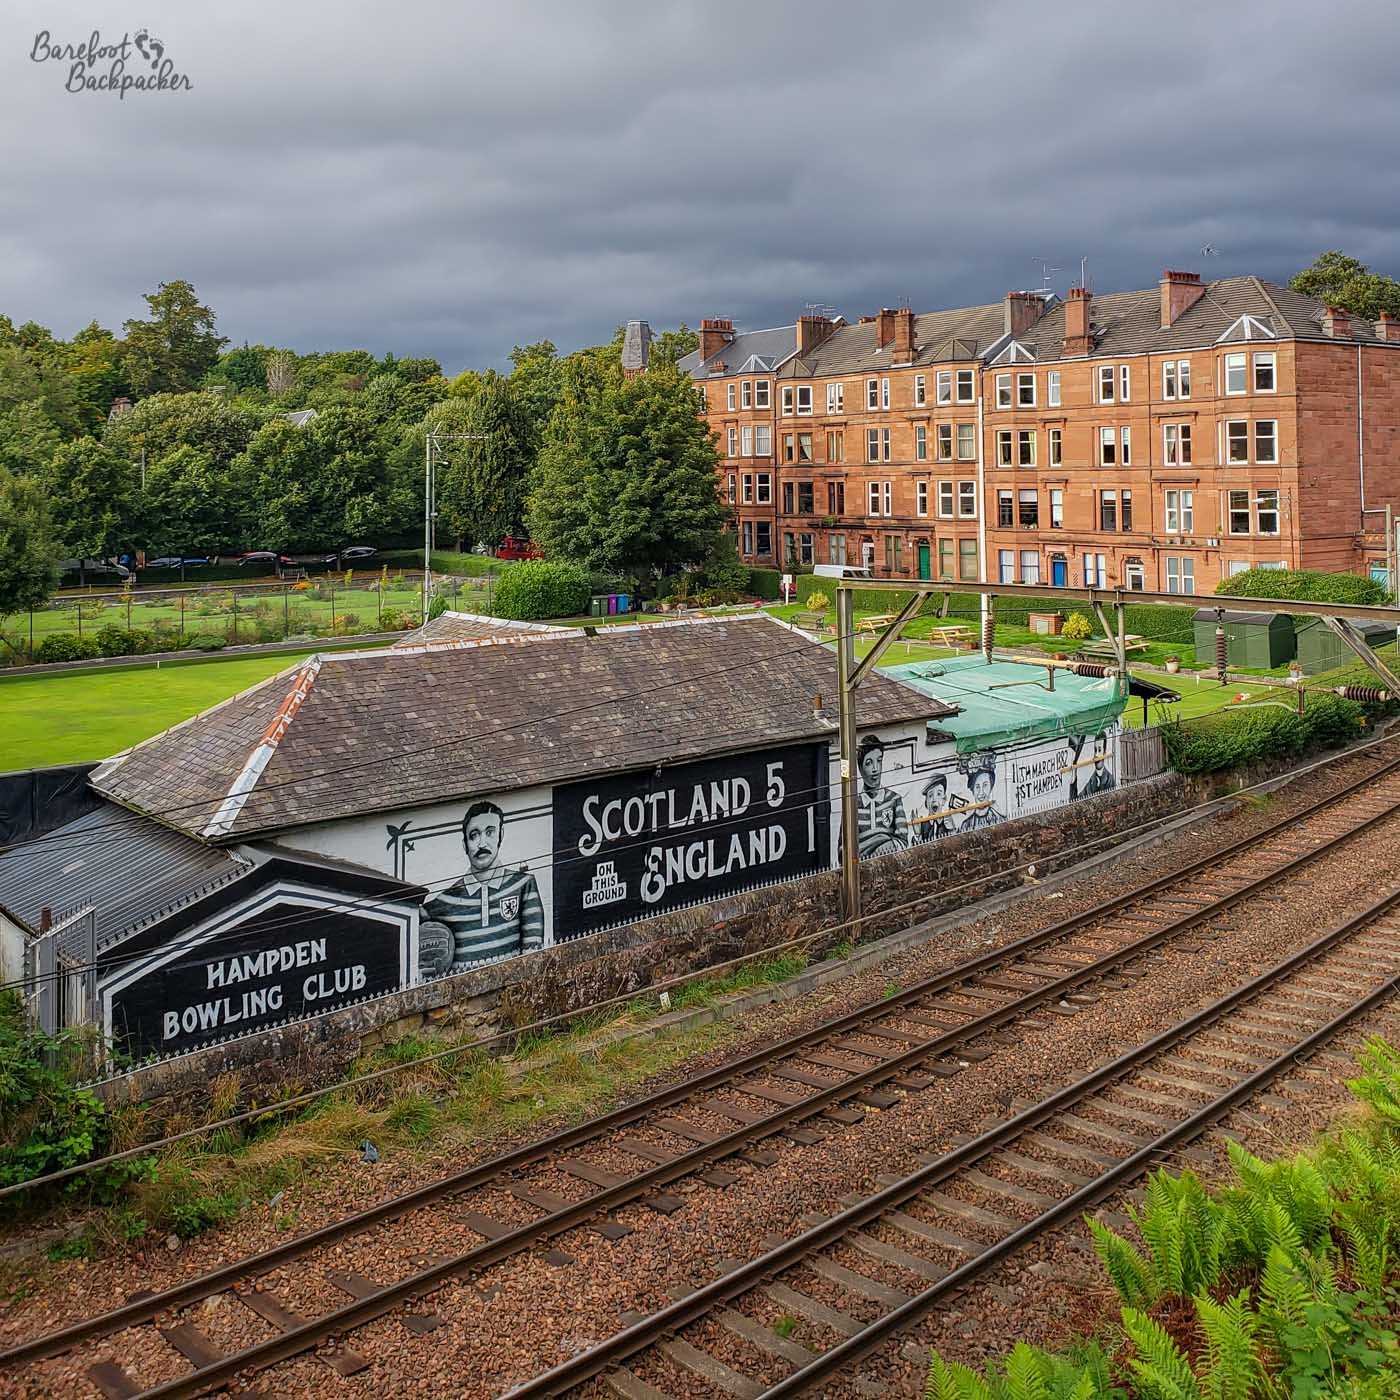 Shot from higher ground of a double-track railway line, behind which is a long, short building advertising itself on the roof as 'Hampden Bowling Club' but then several painted figures and the words 'Scotland 5 England 1'.